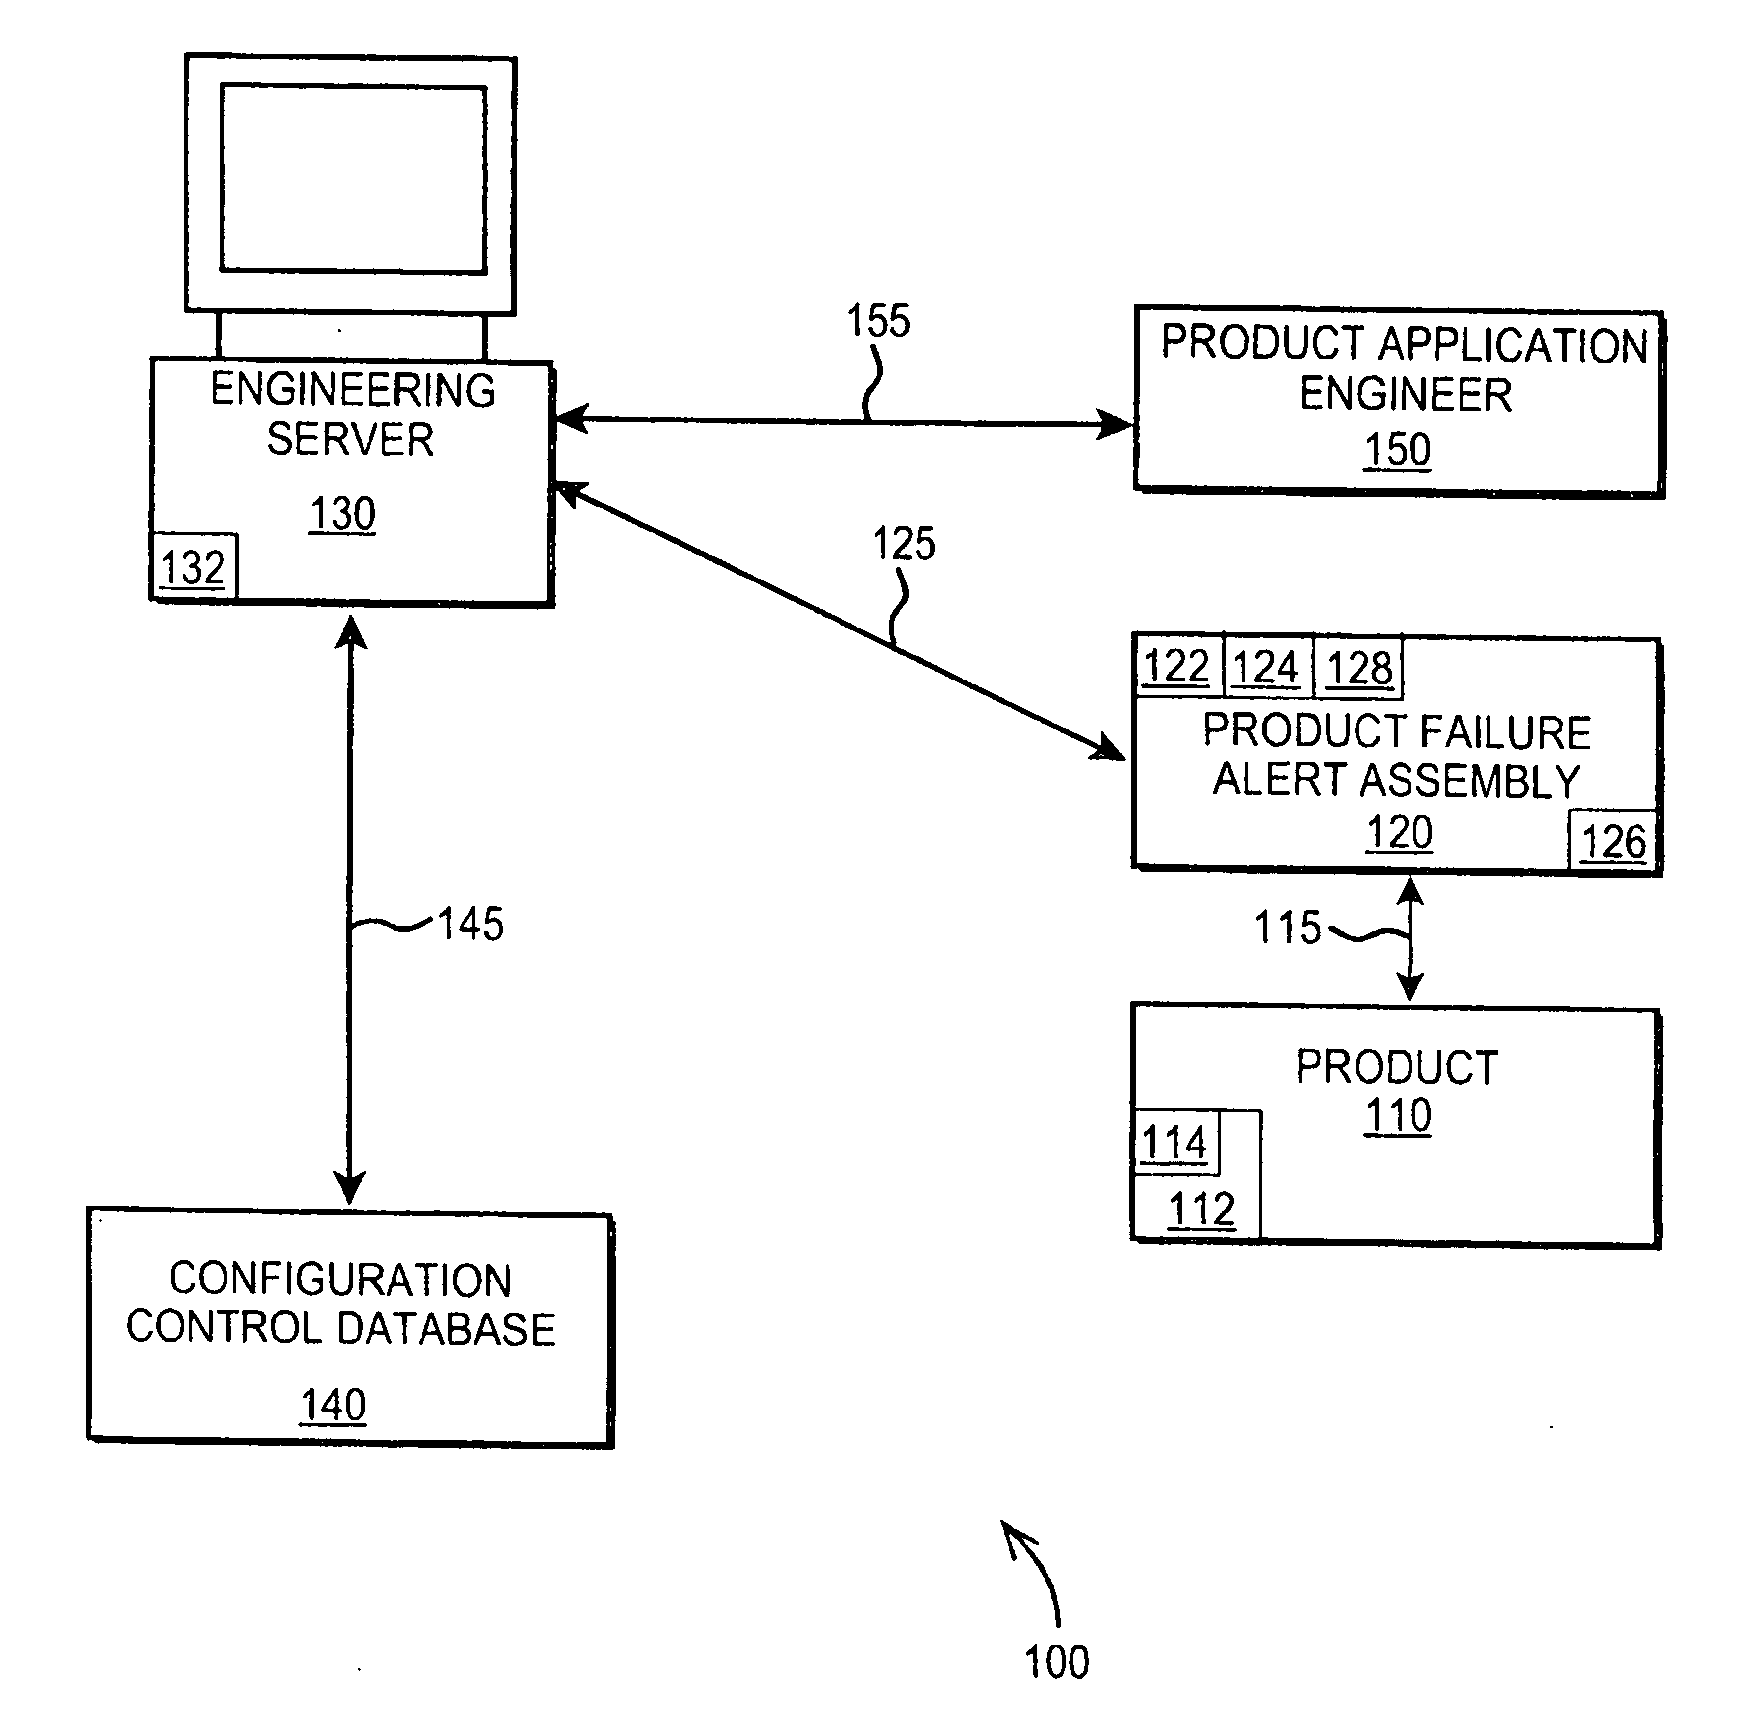 Apparatus and method to repair an error condition in a device comprising a computer readable medium comprising computer readable code